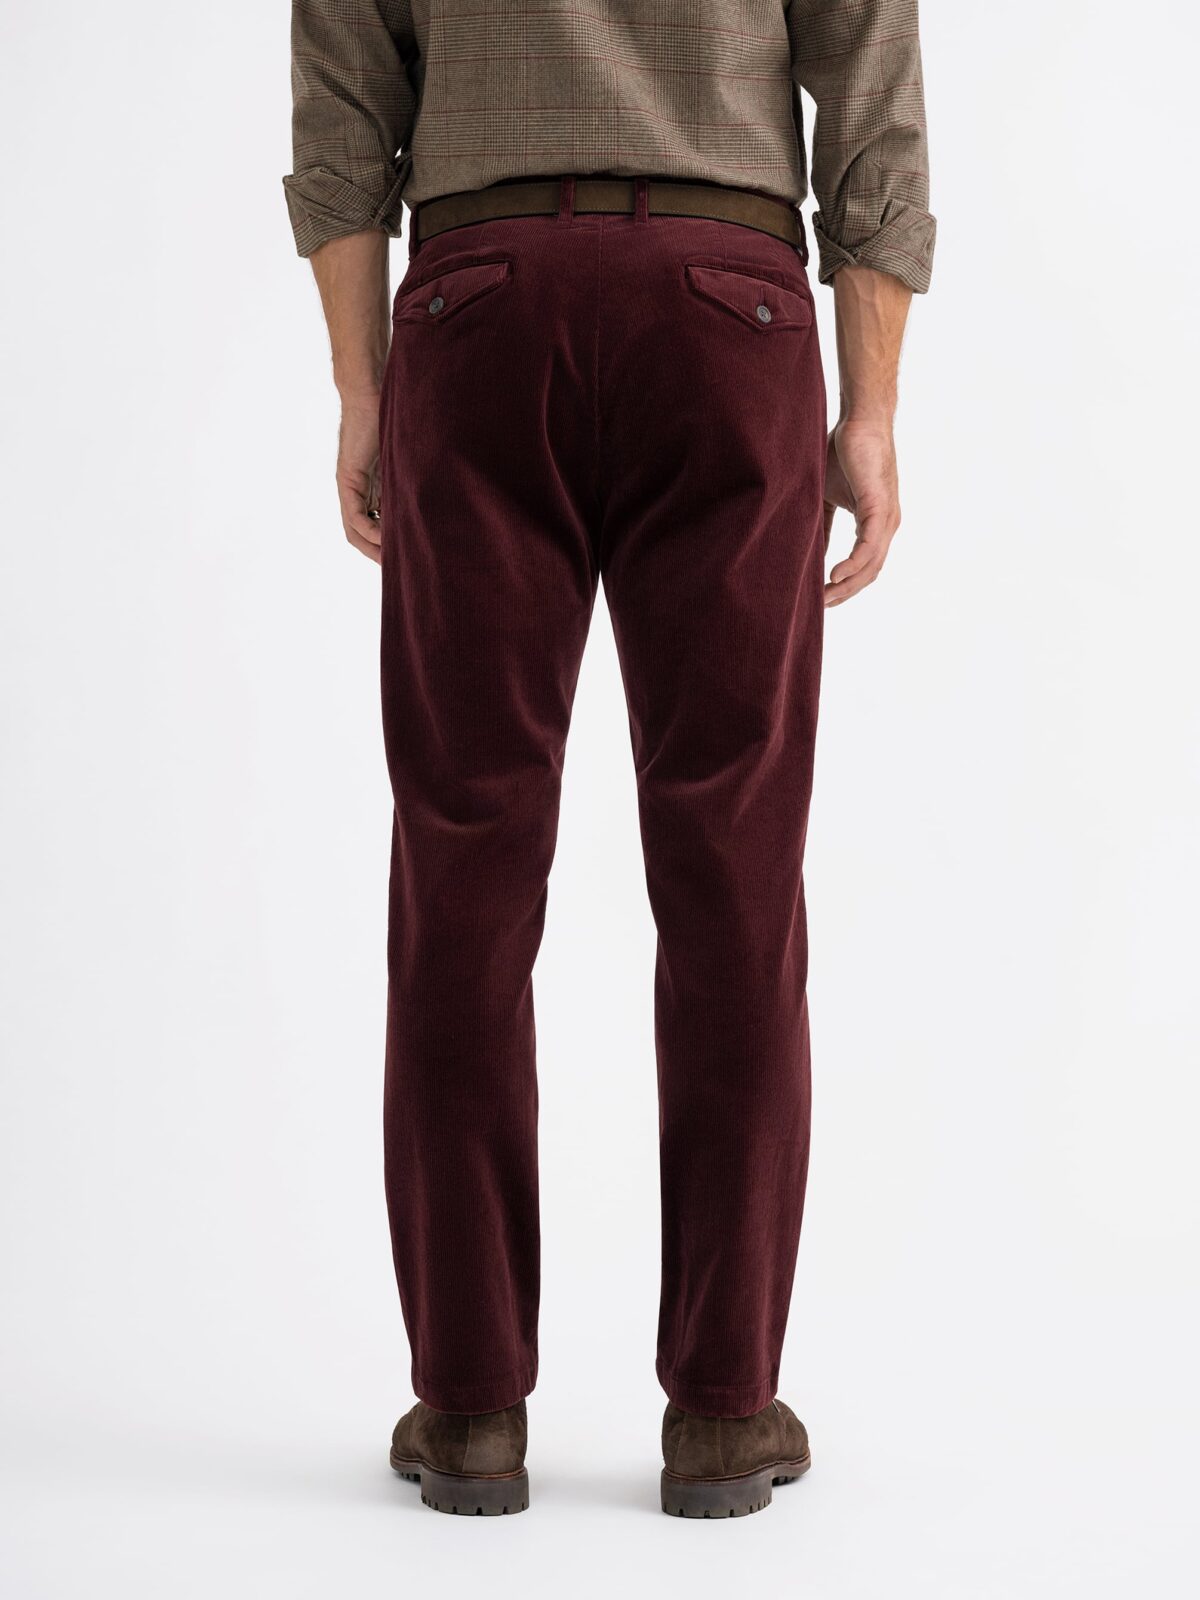 Custom Made Tight Fit Sweat Pants In Burgundy